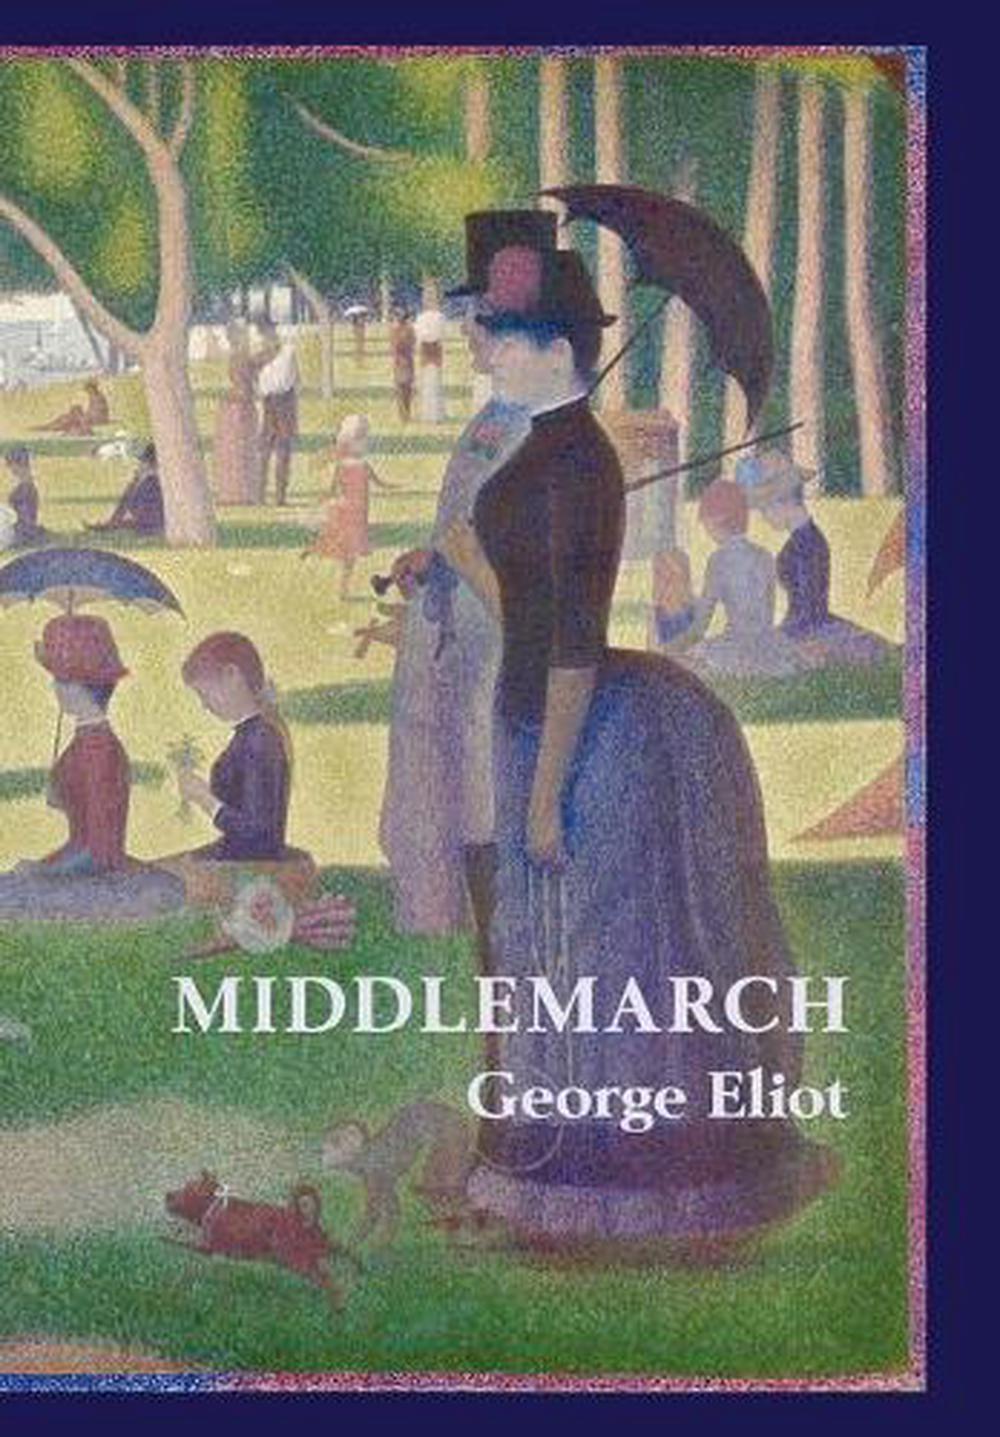 middlemarch novel